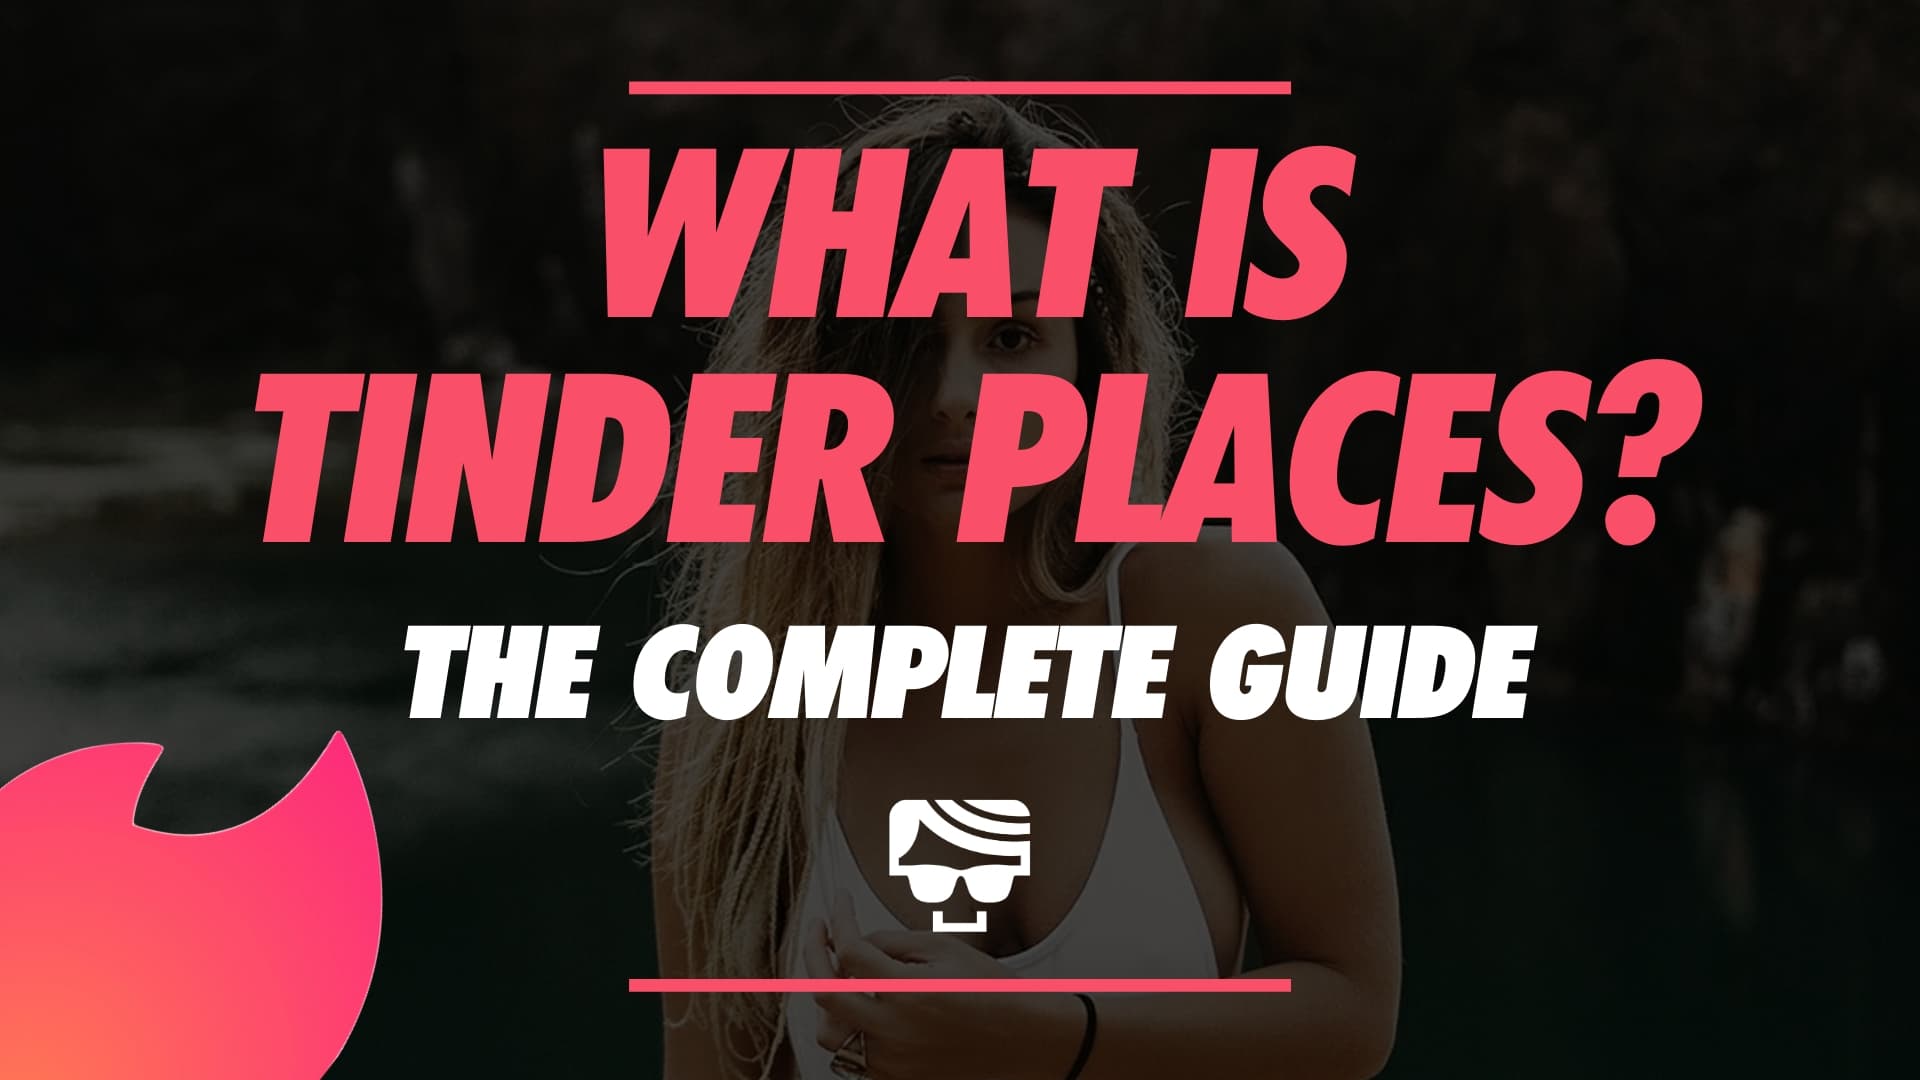 The Complete Guide To Tinder Places